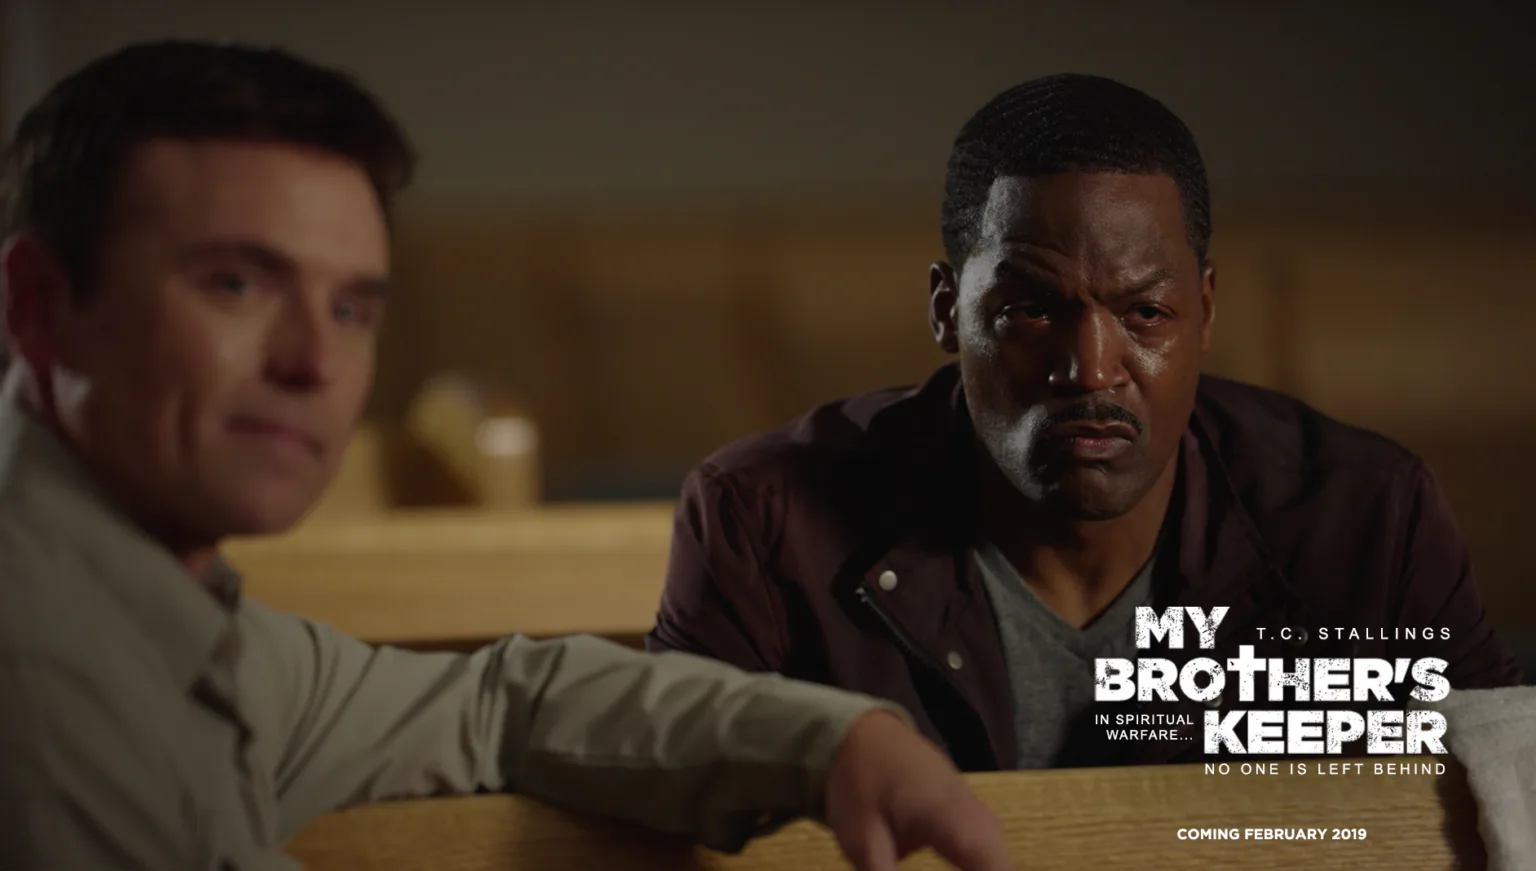 My Brother’s Keeper March 2024 Teasers

